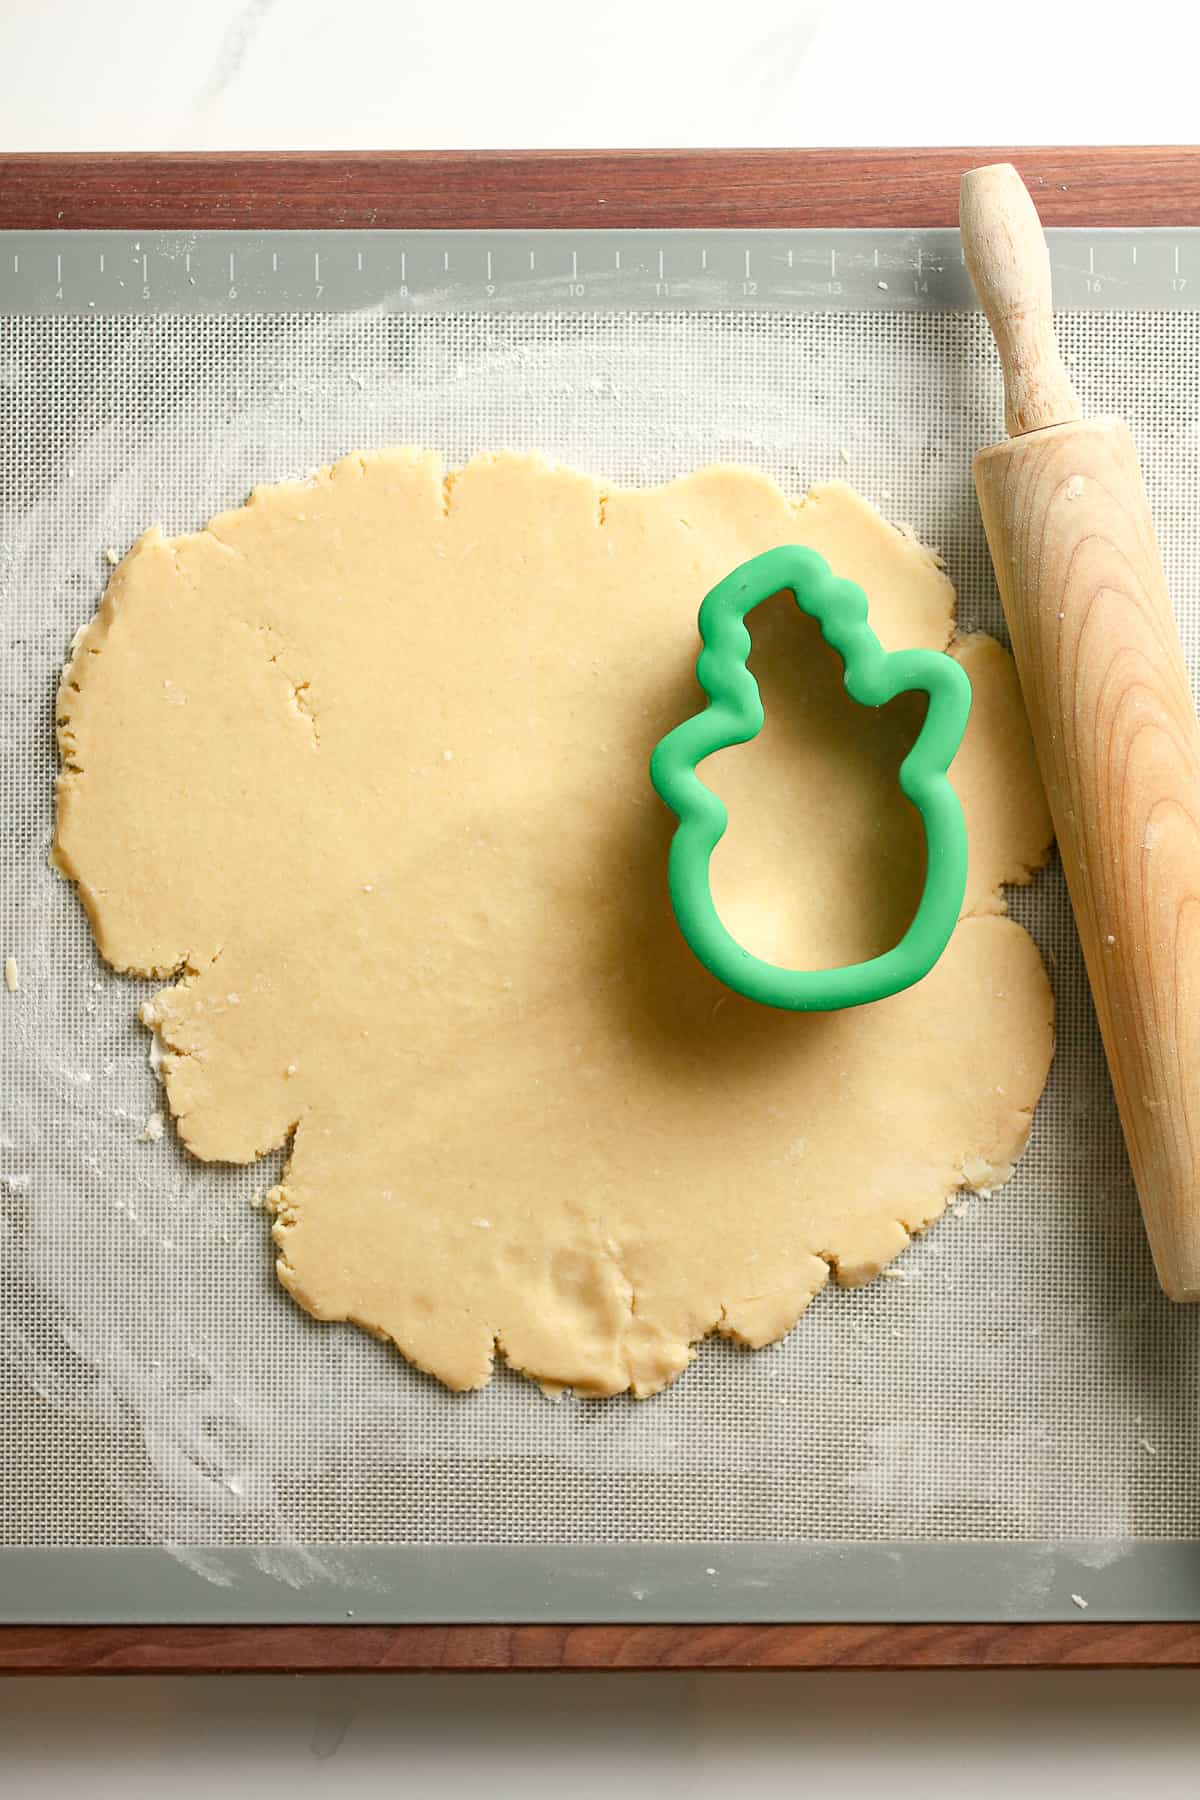 Some rolled out dough with a cookie cutter snowman.